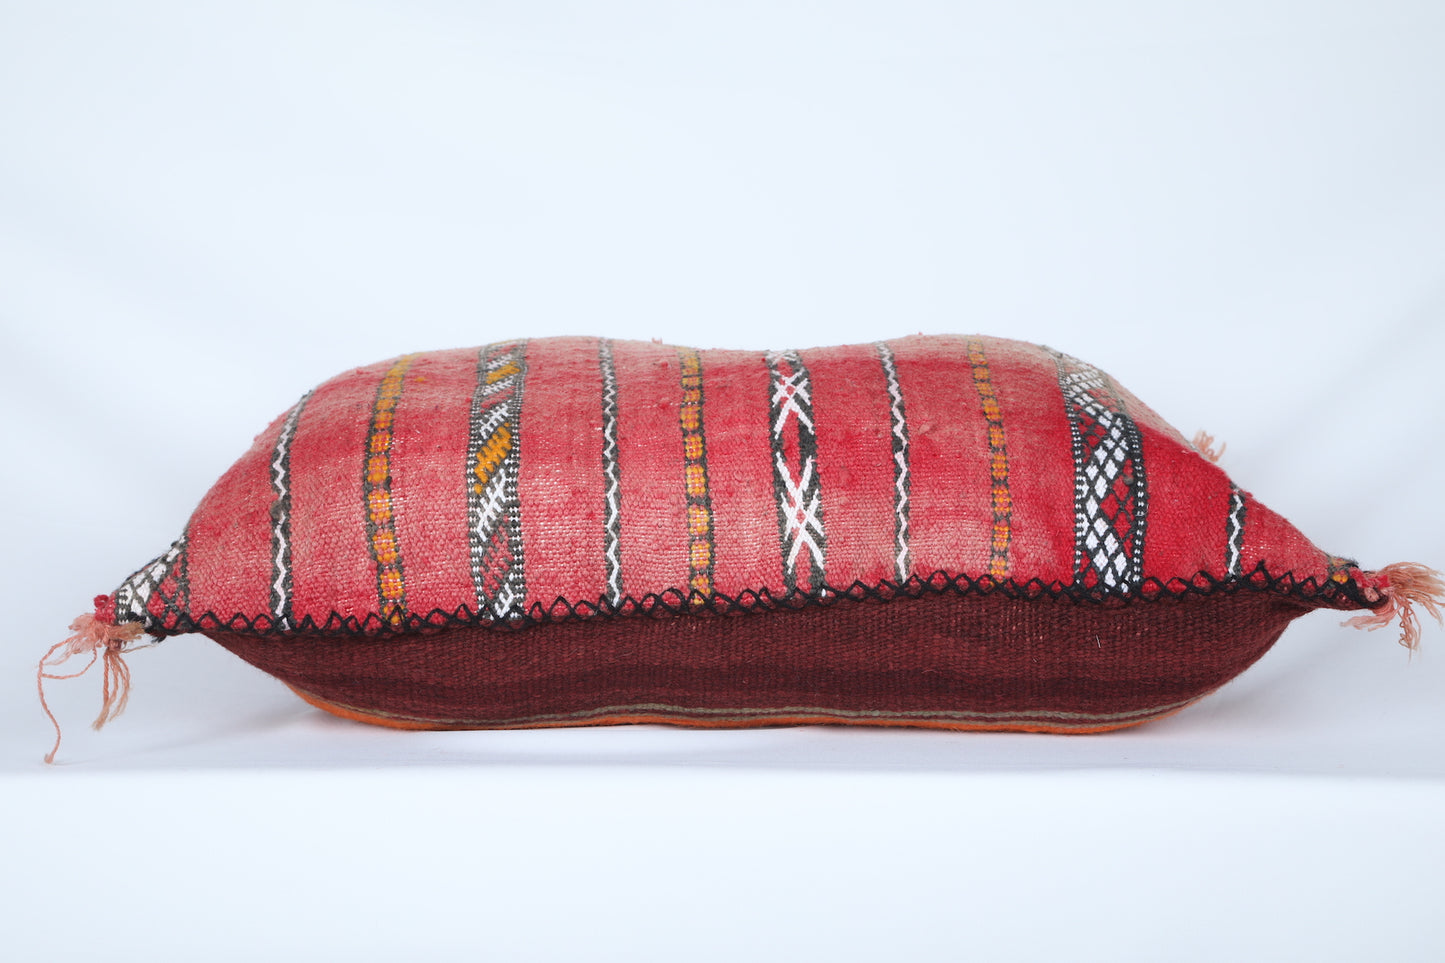 Vintage moroccan kilim pillow 16.9 INCHES X 22.8 INCHES